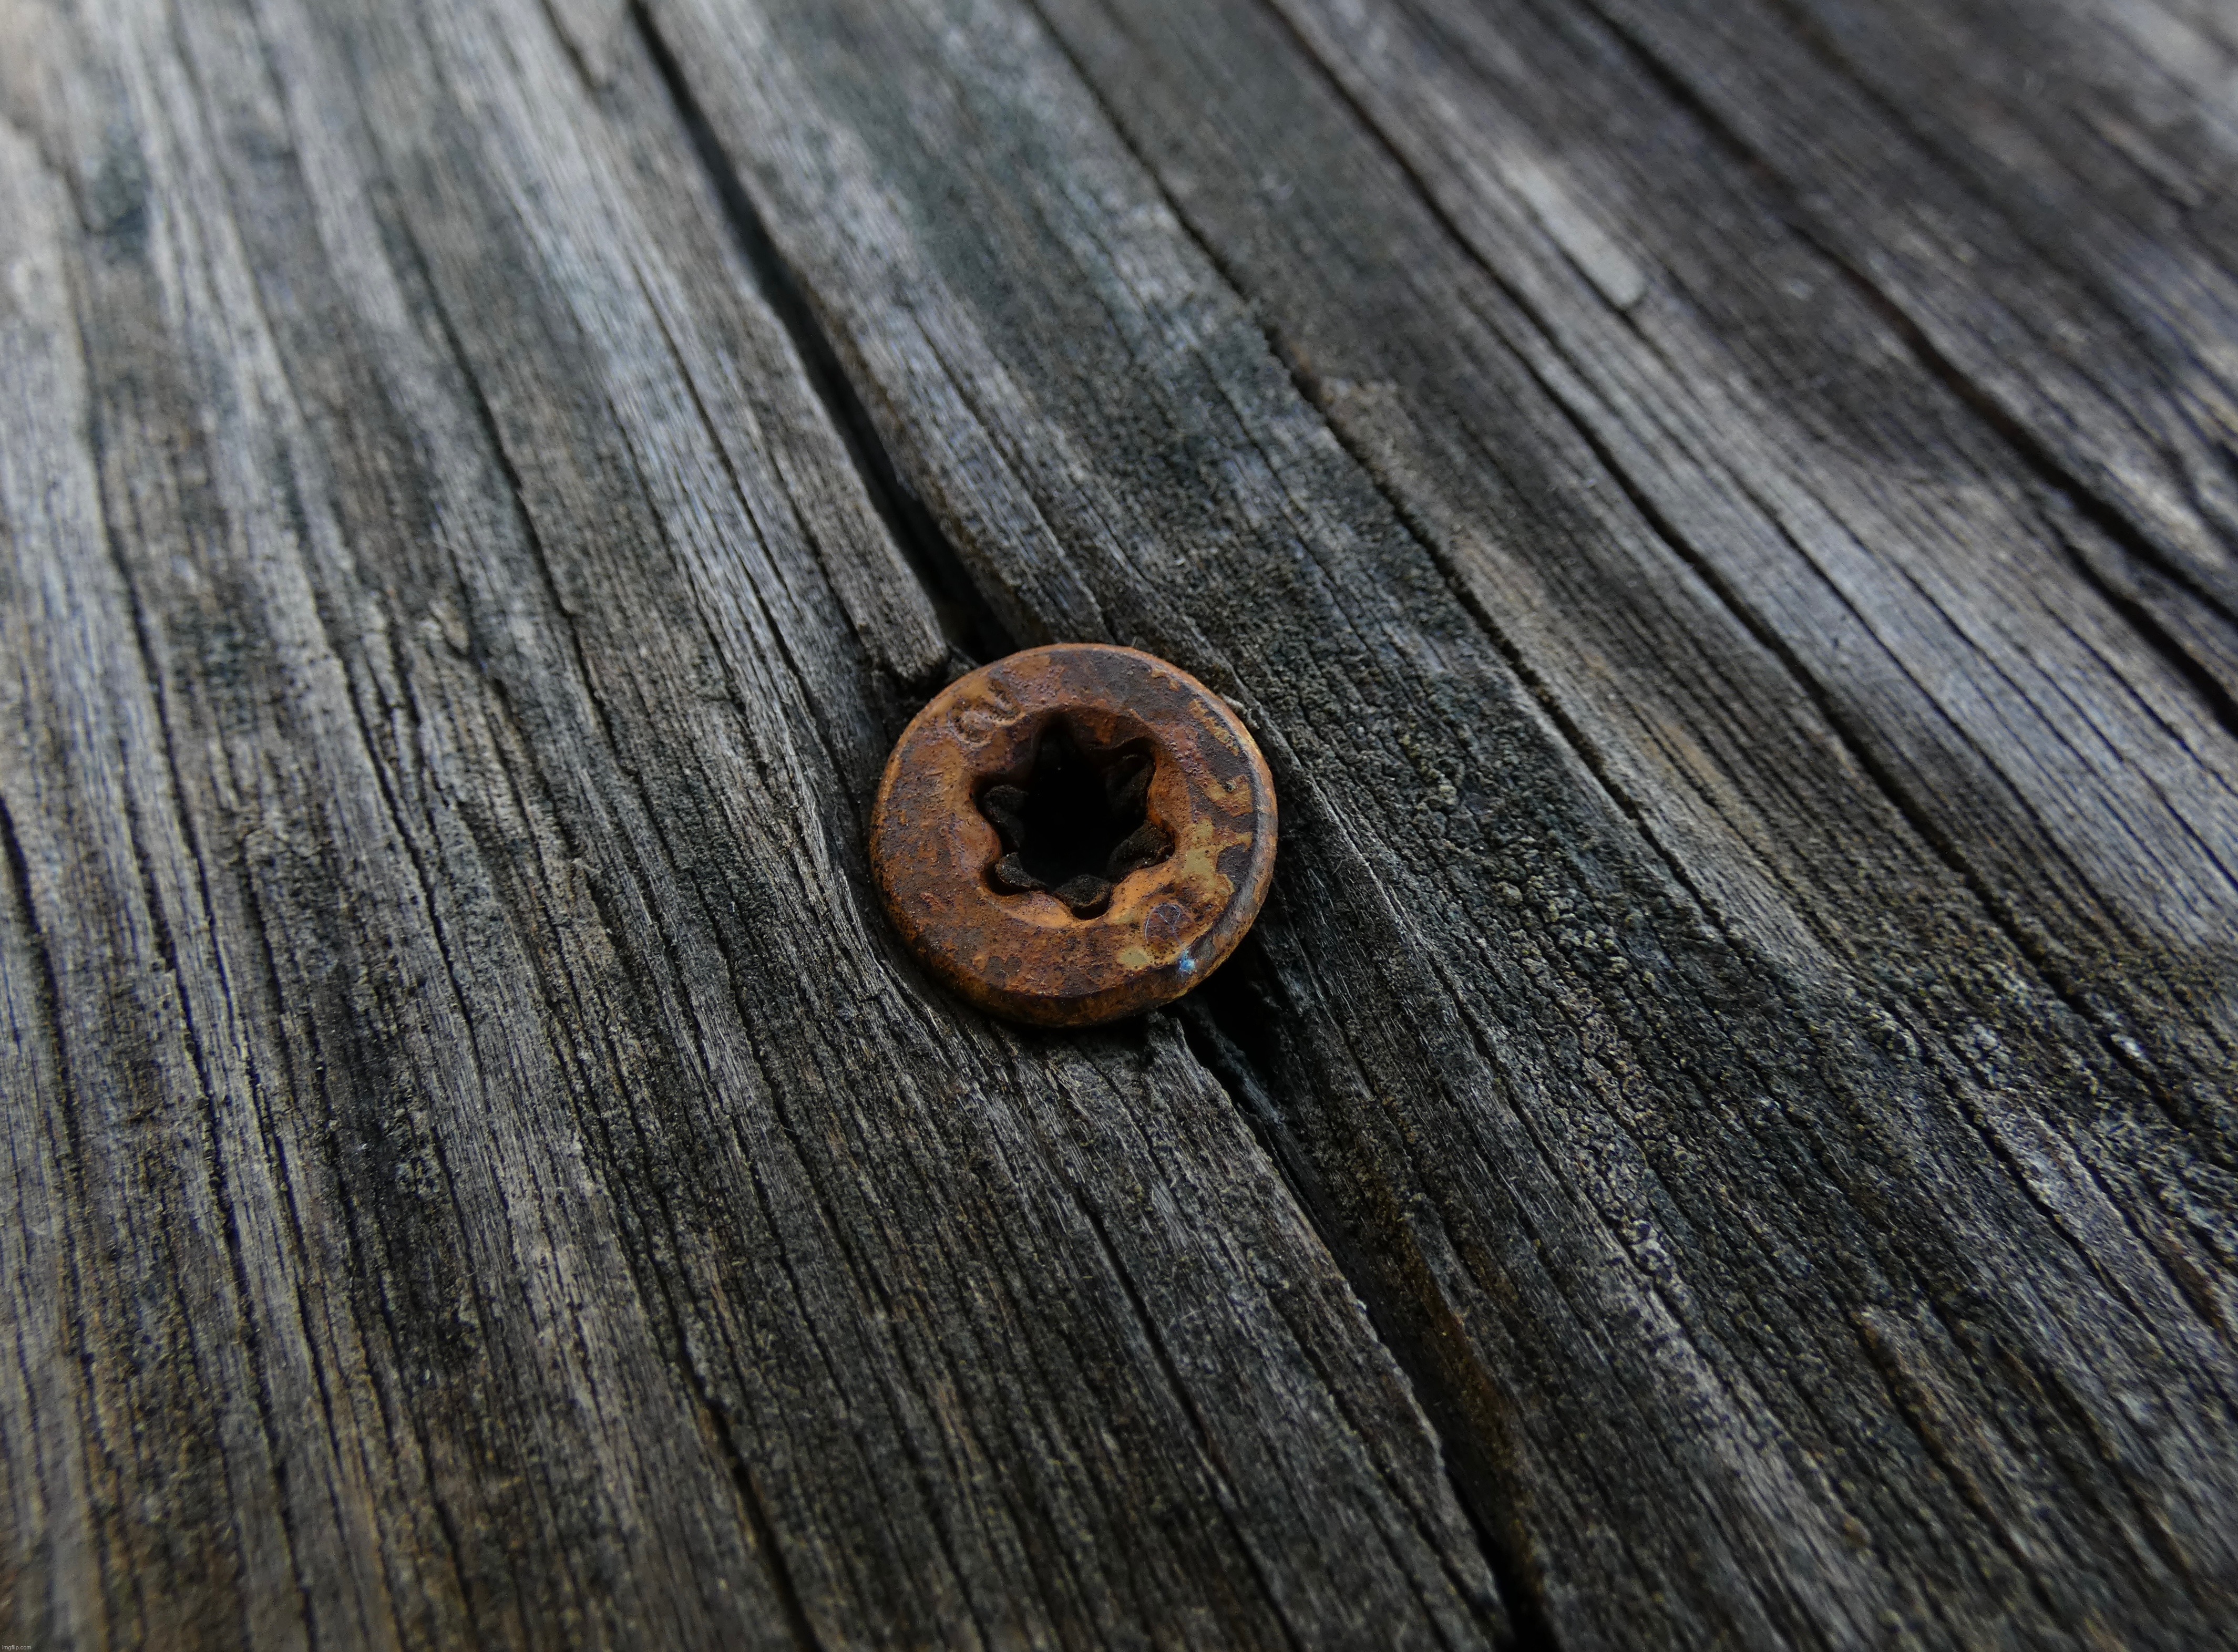 Rusty screw in wood deck planks | image tagged in share your own photos,panasonic lumix fz80 | made w/ Imgflip meme maker